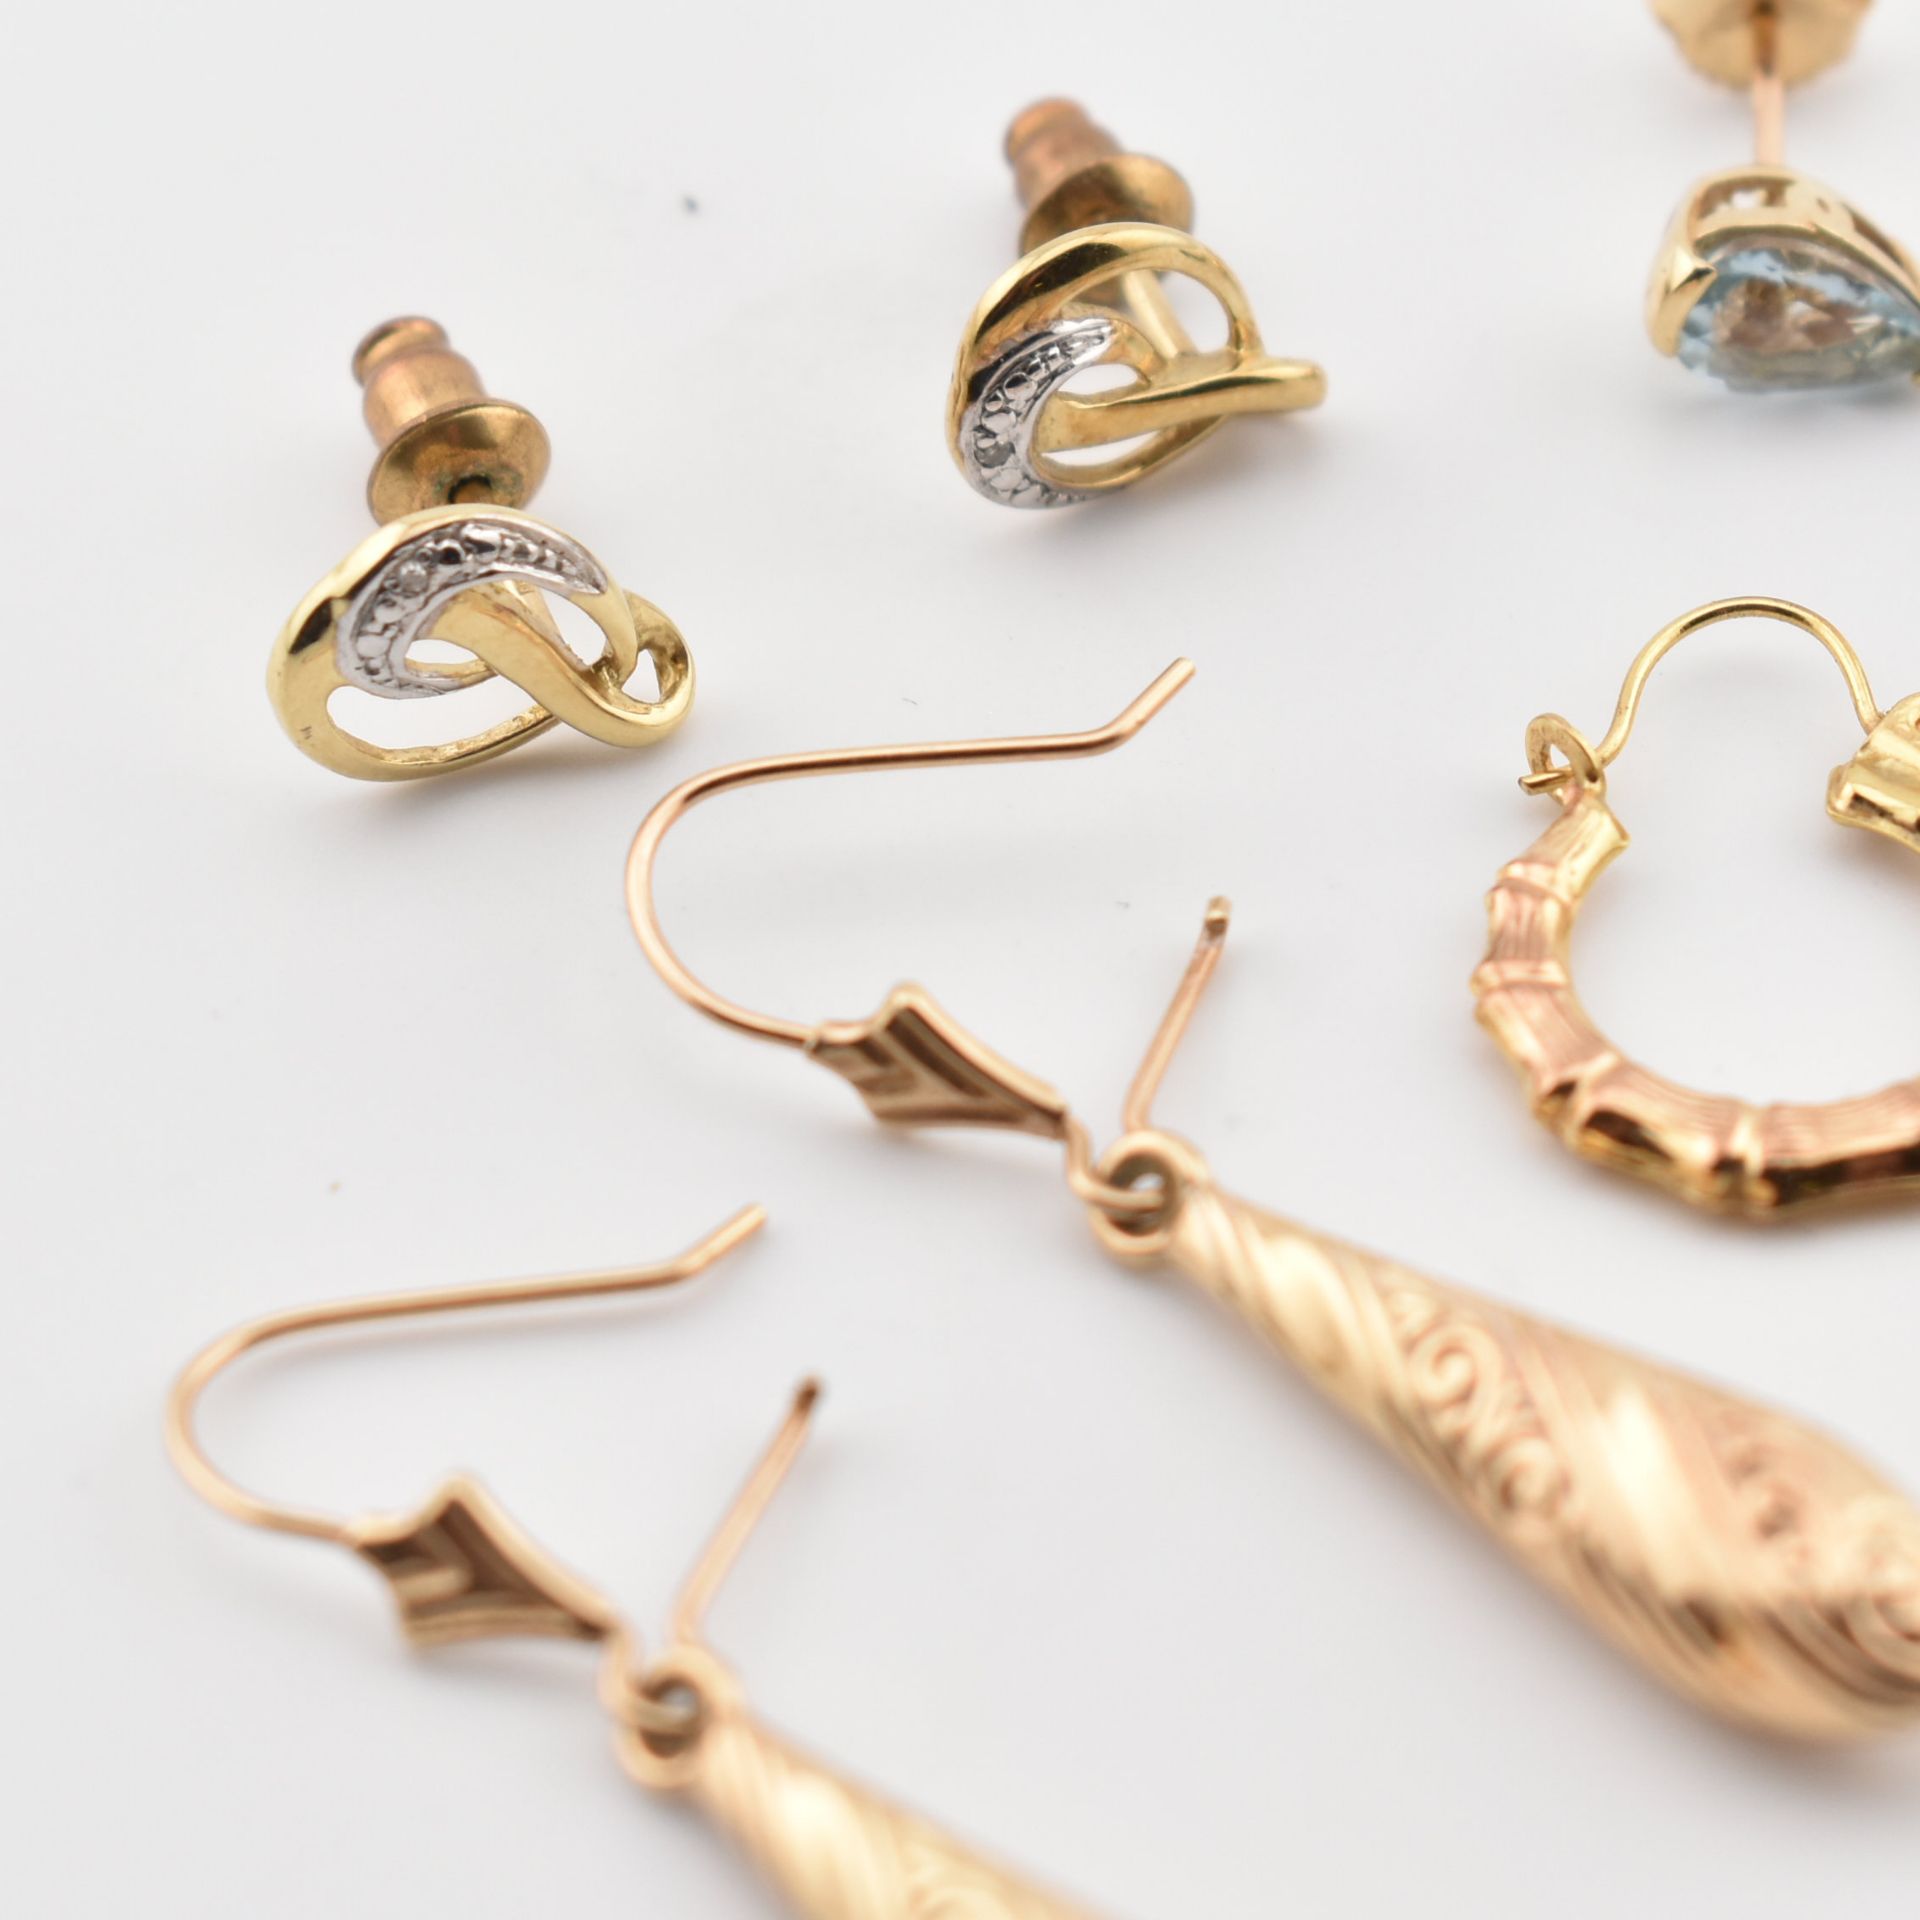 FOUR PAIRS OF 9CT GOLD & GEM SET EARRINGS - Image 3 of 4